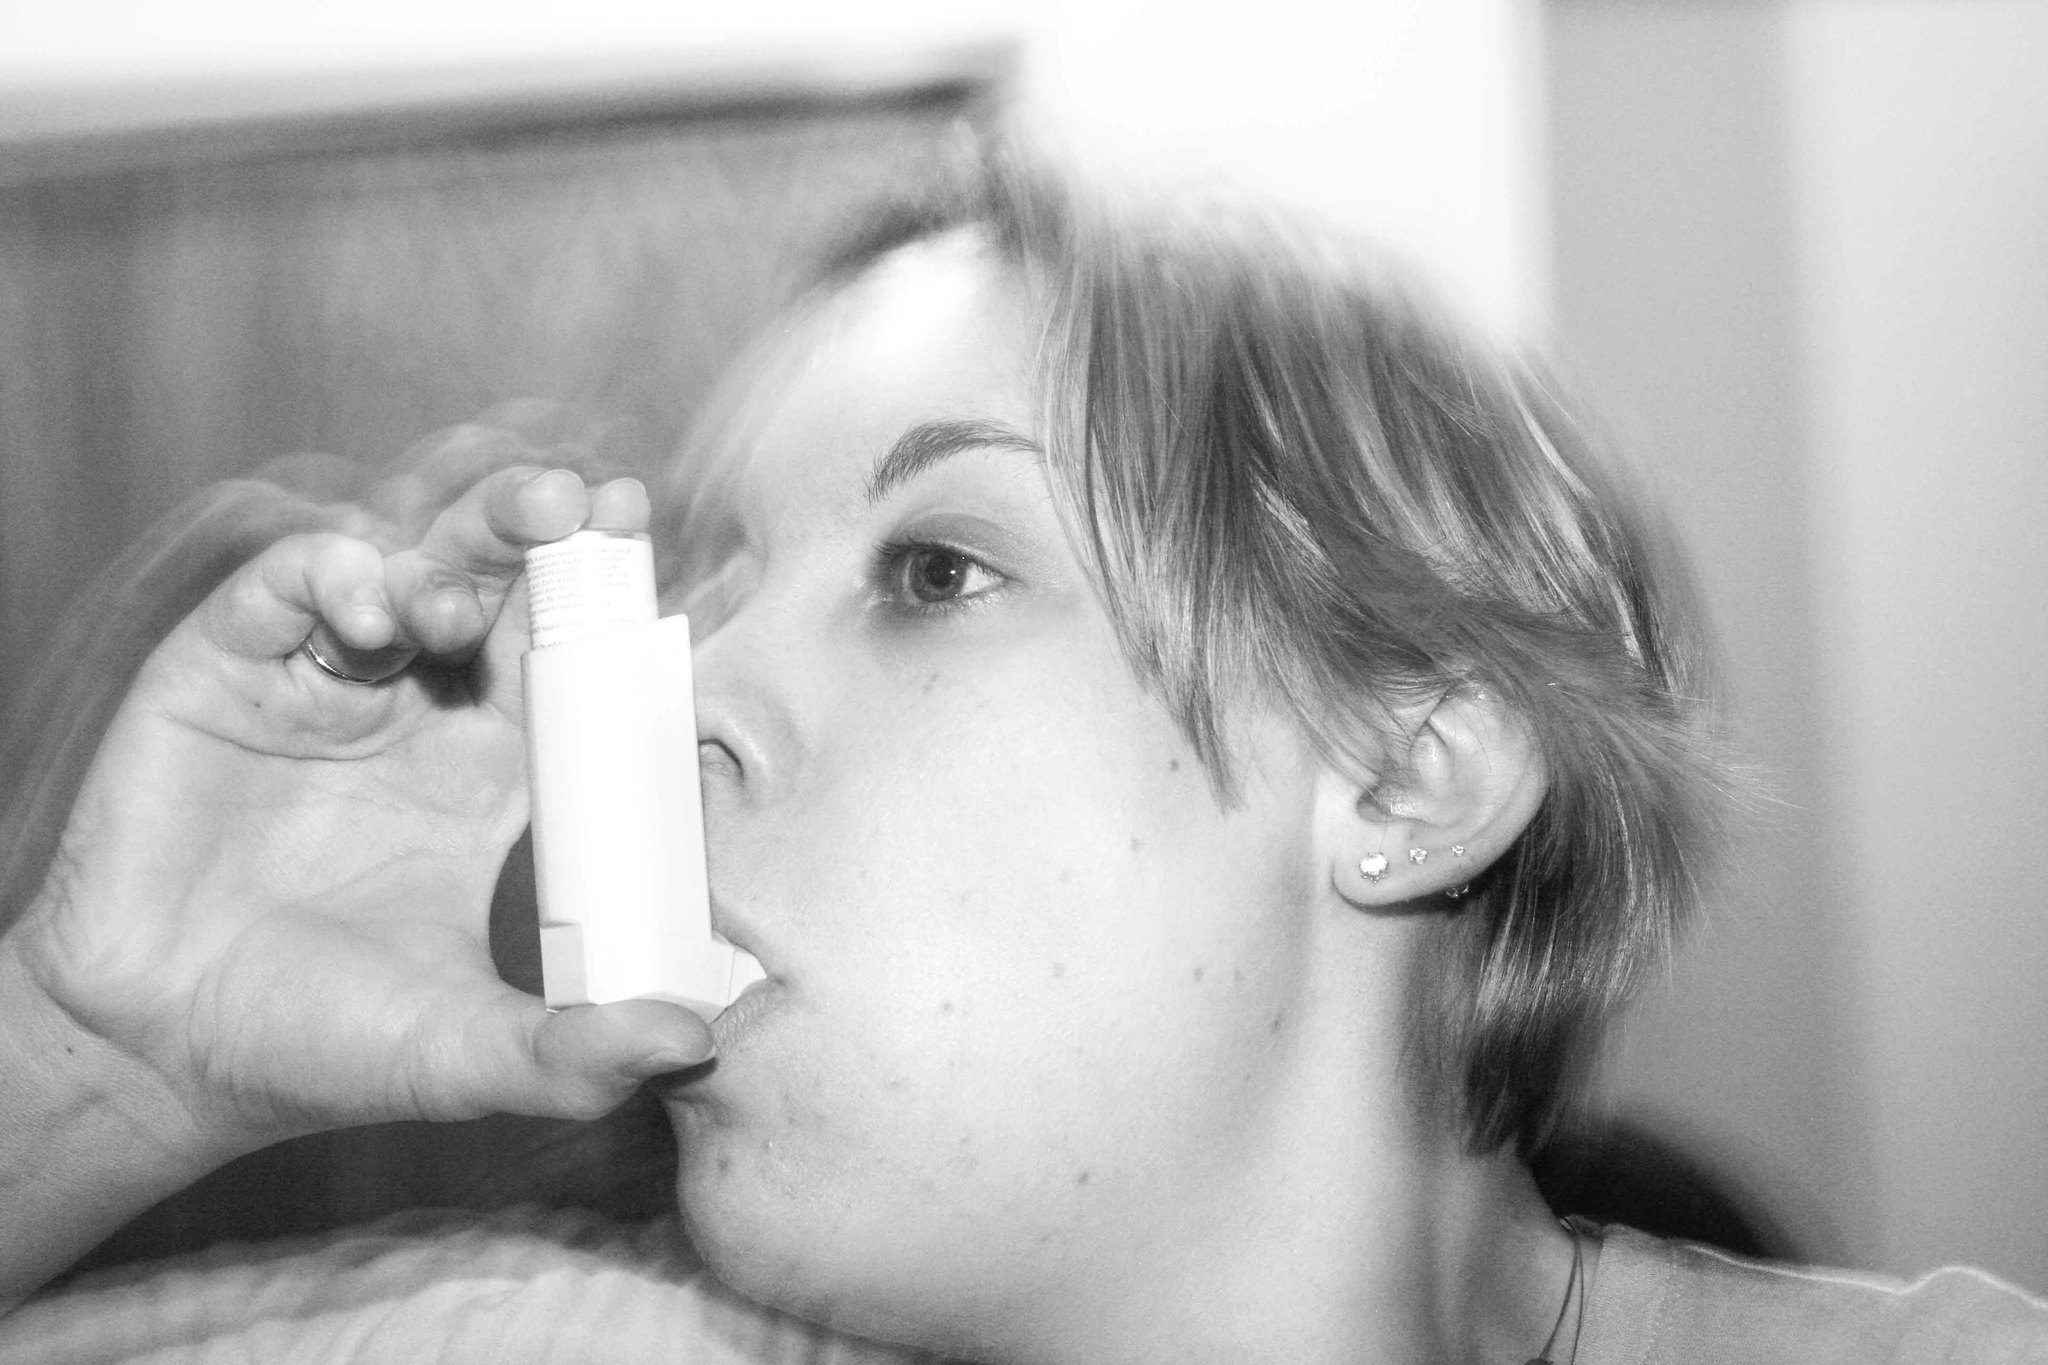 A push for Maryland schools to stock emergency inhalers